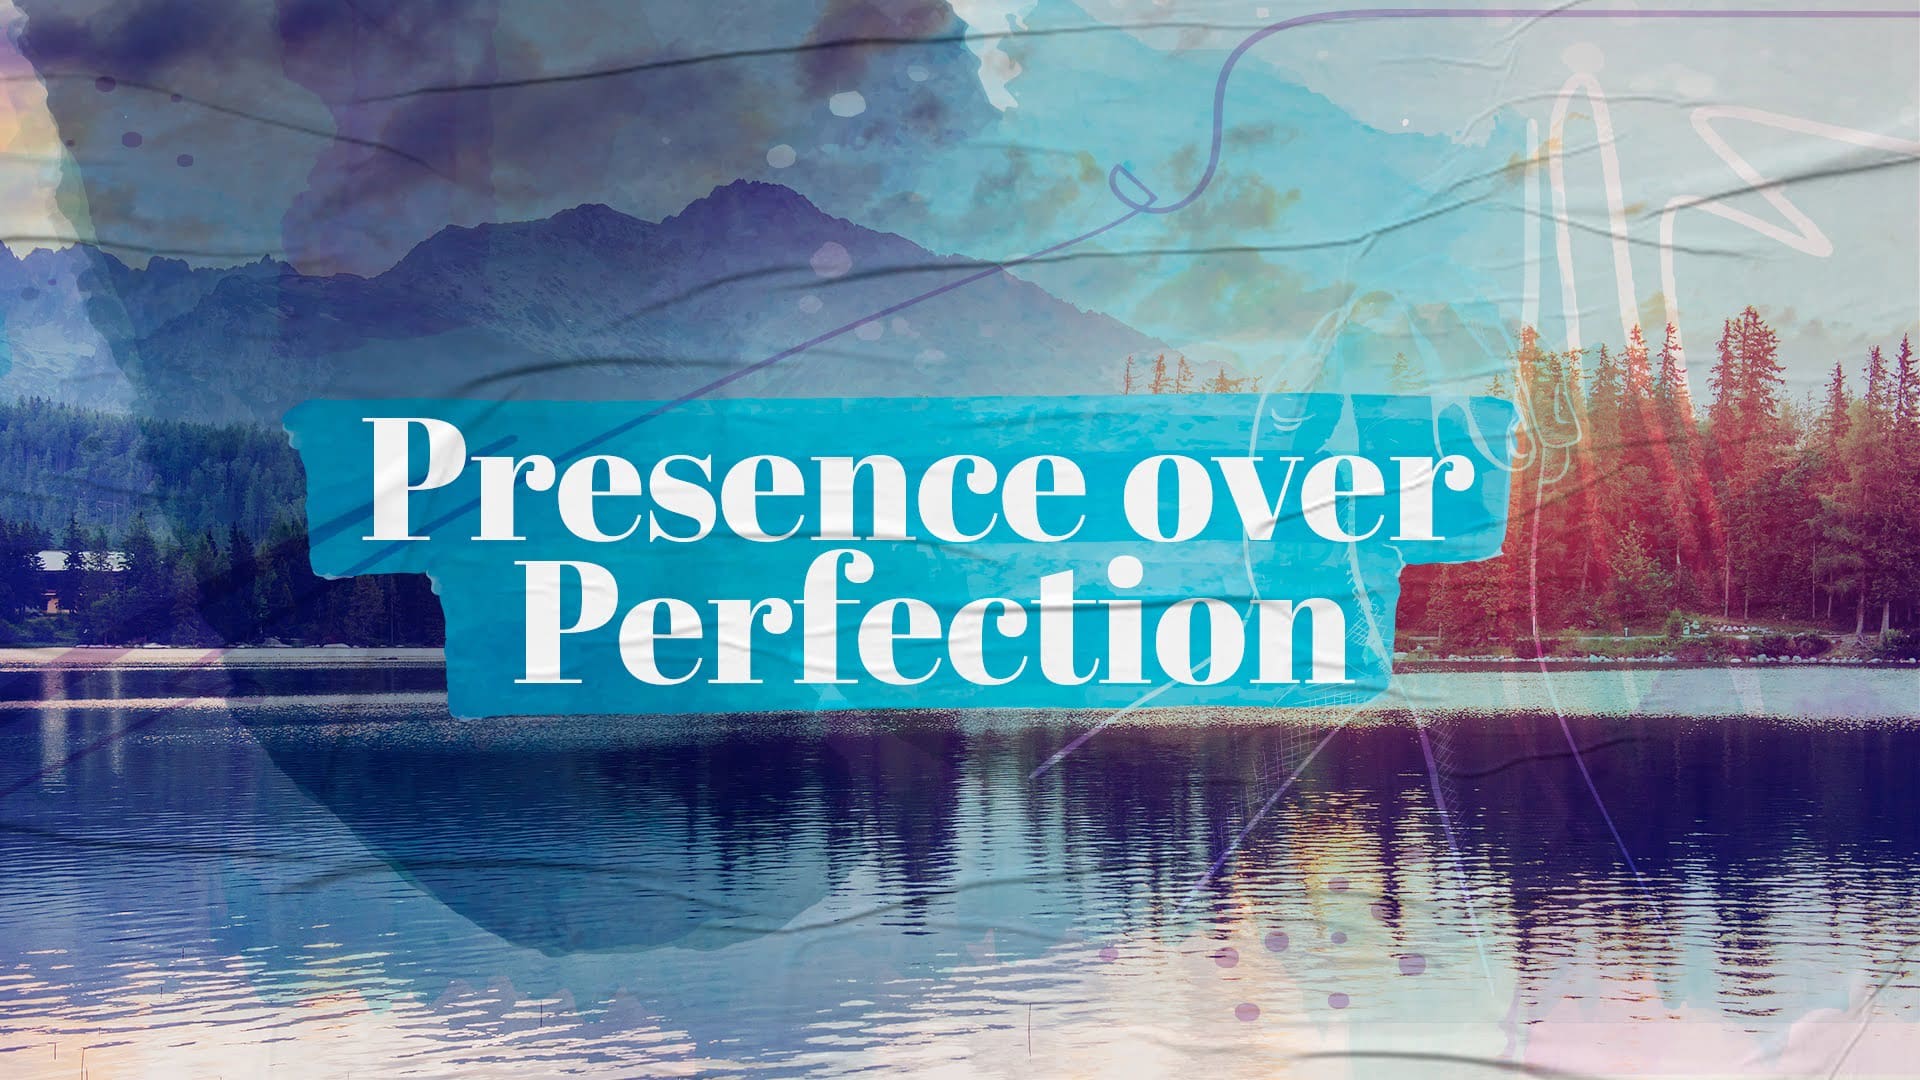 Presence over Perfection Image